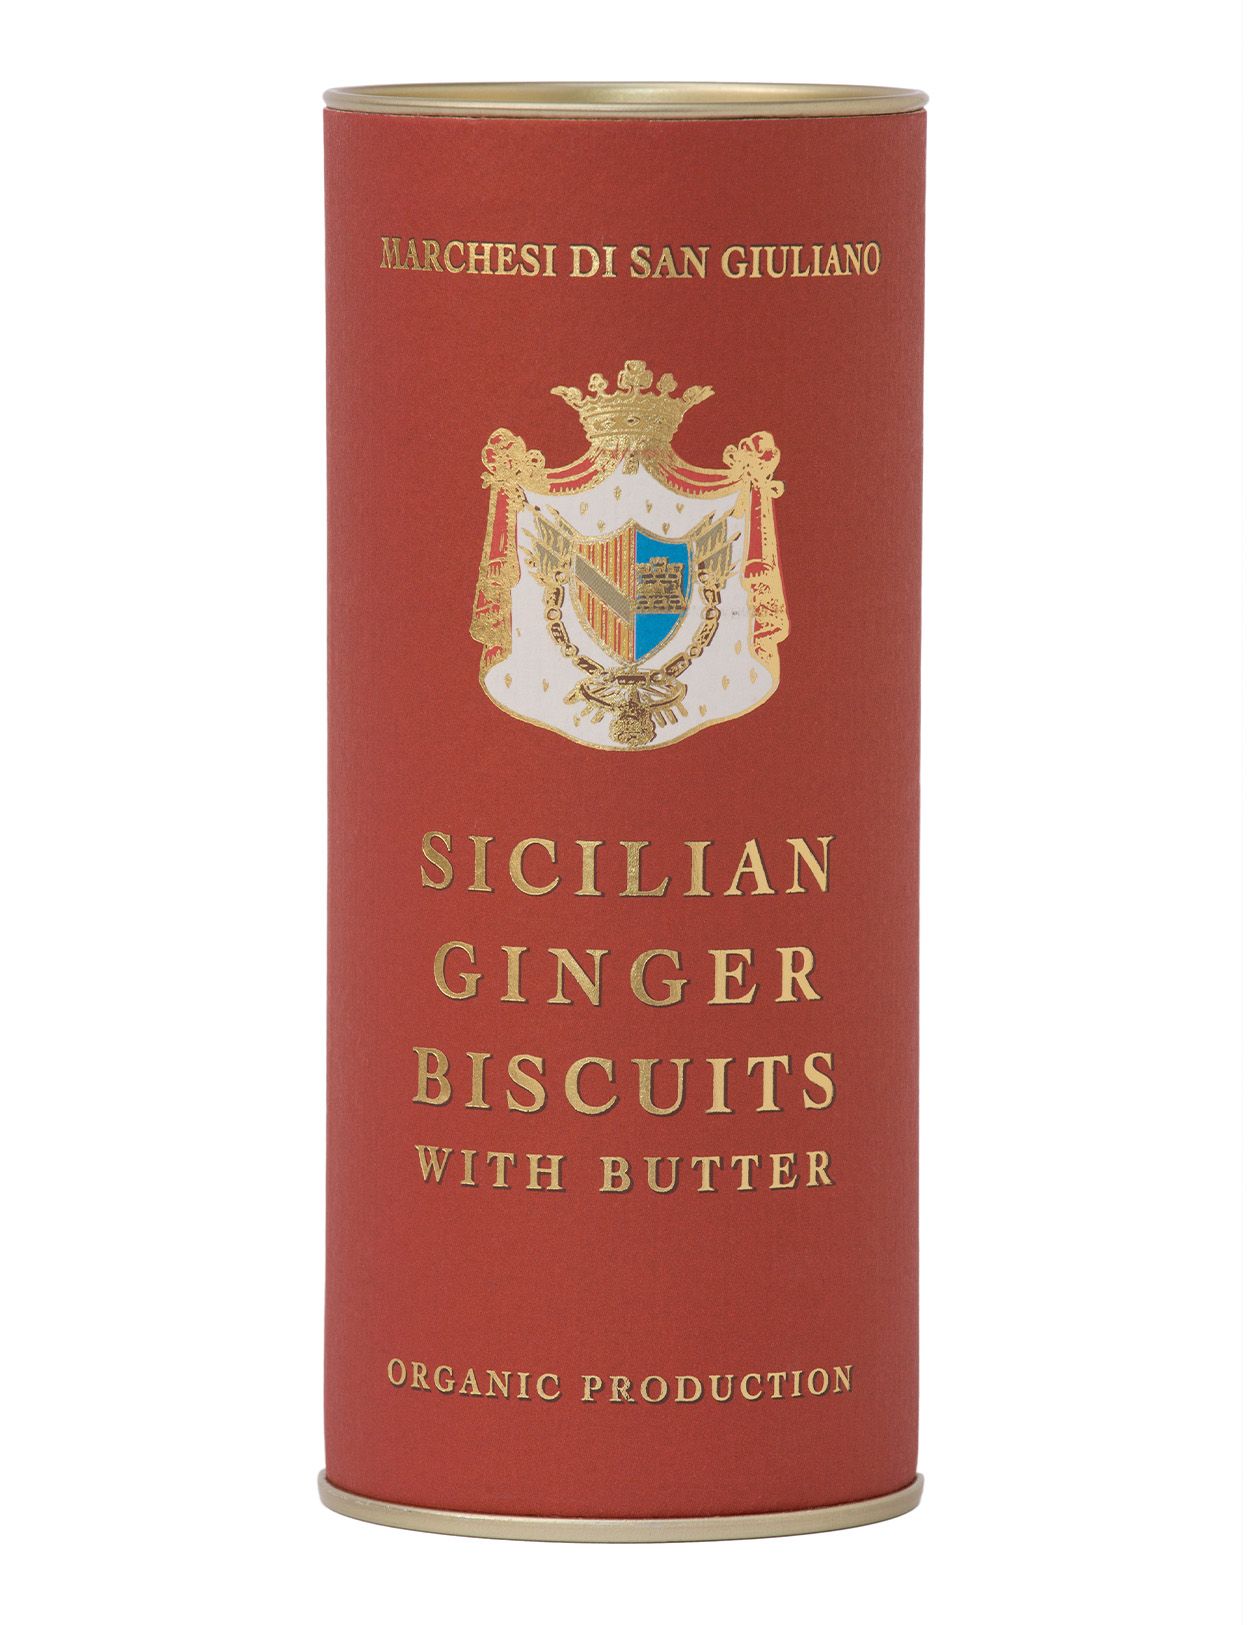 Sicilian Ginger Biscuits with Butter